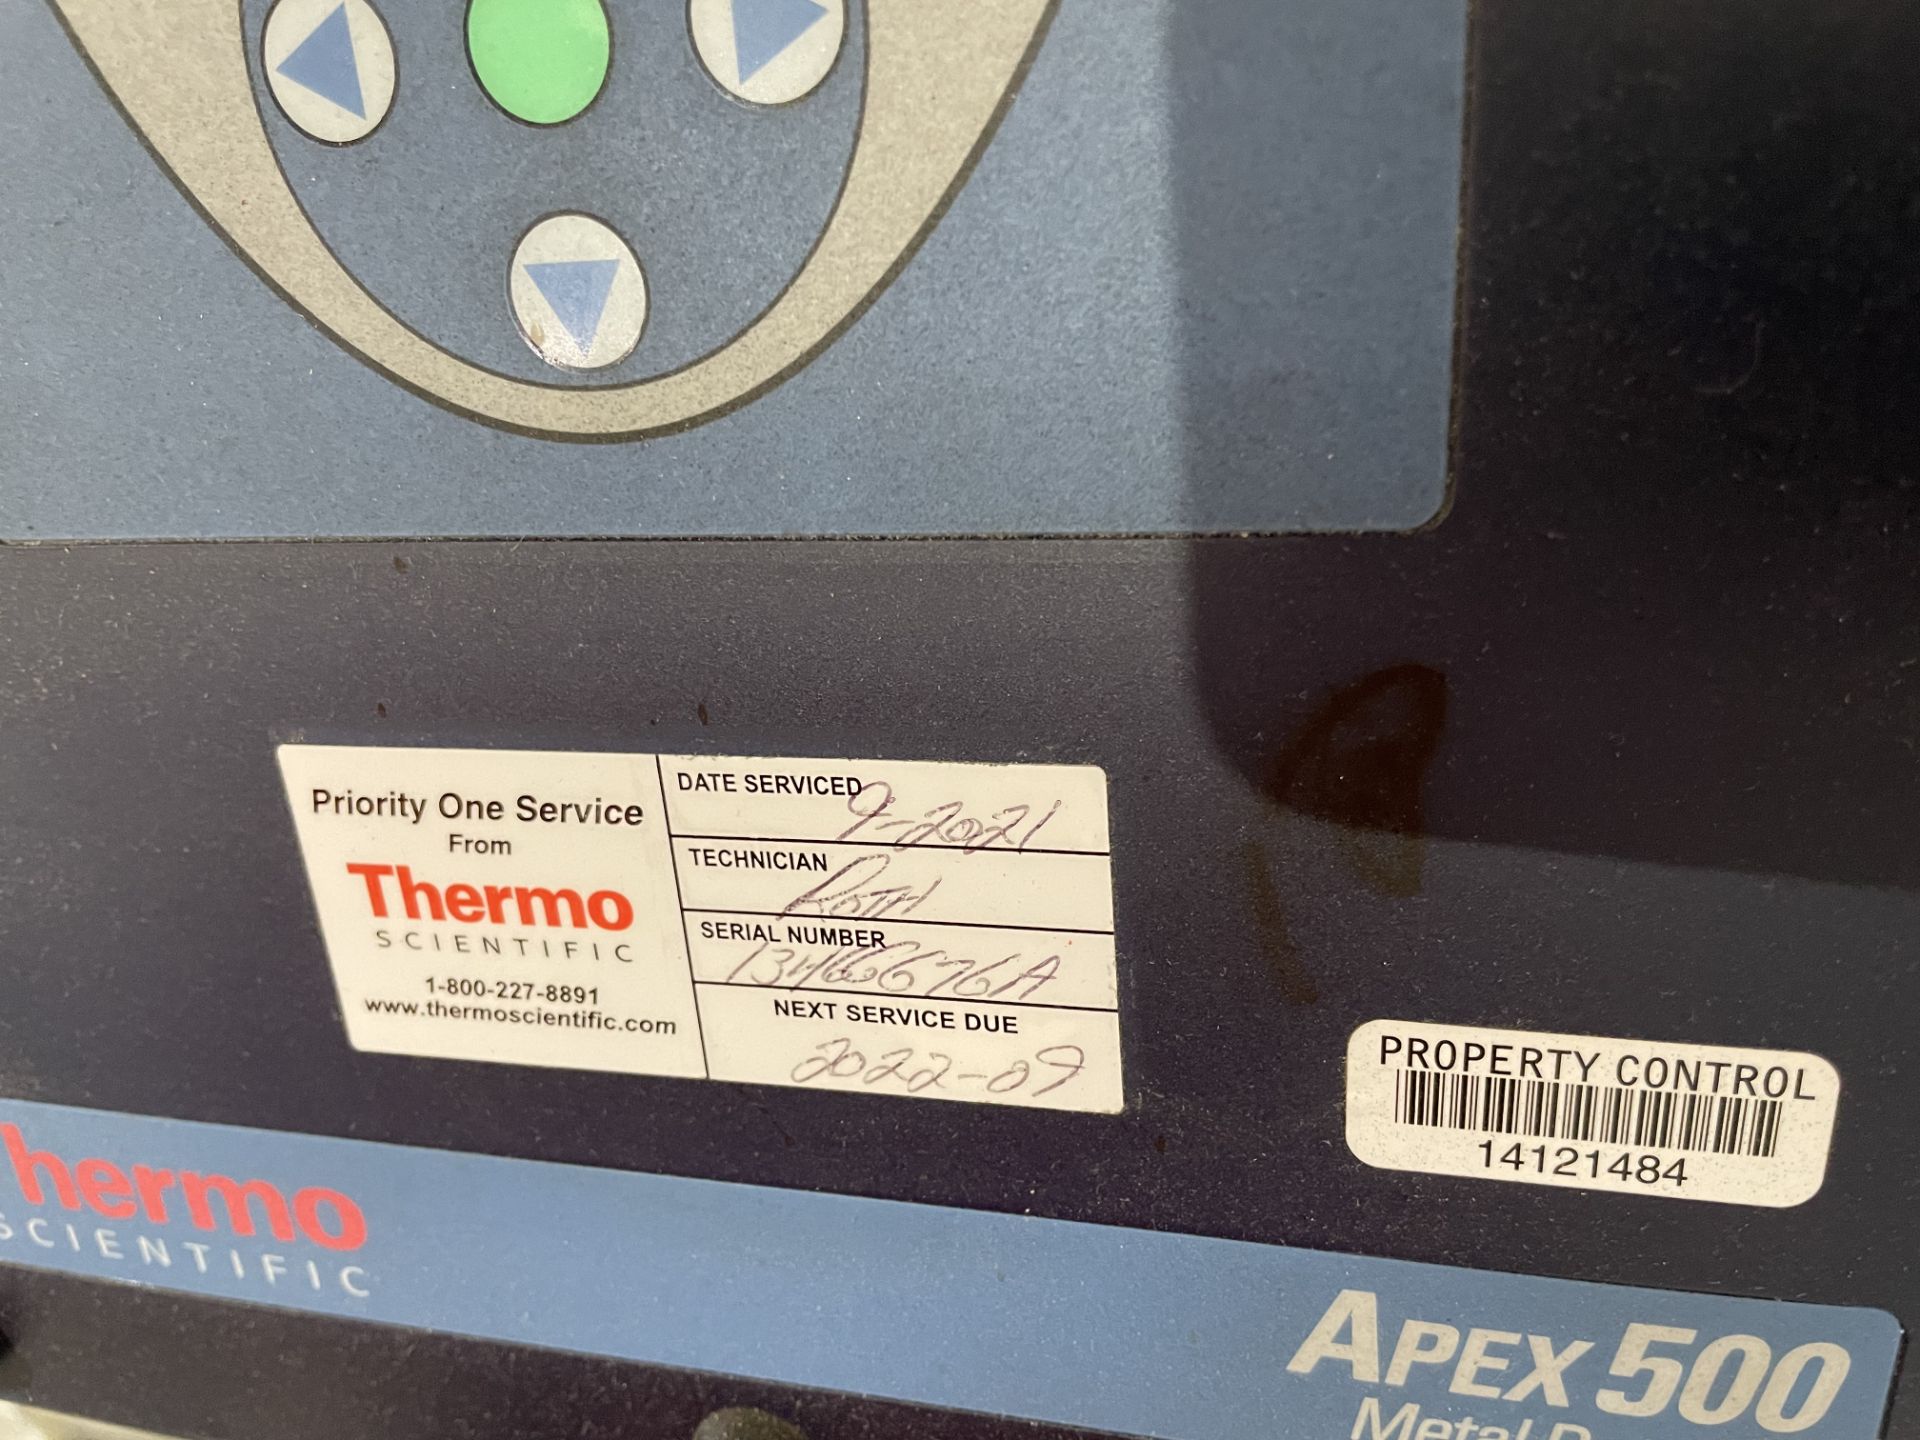 Thermo Scientific Apex 500 Metal Detector 3.5" x 2.5" Aperture, Loading Fee: $500 - Image 2 of 3